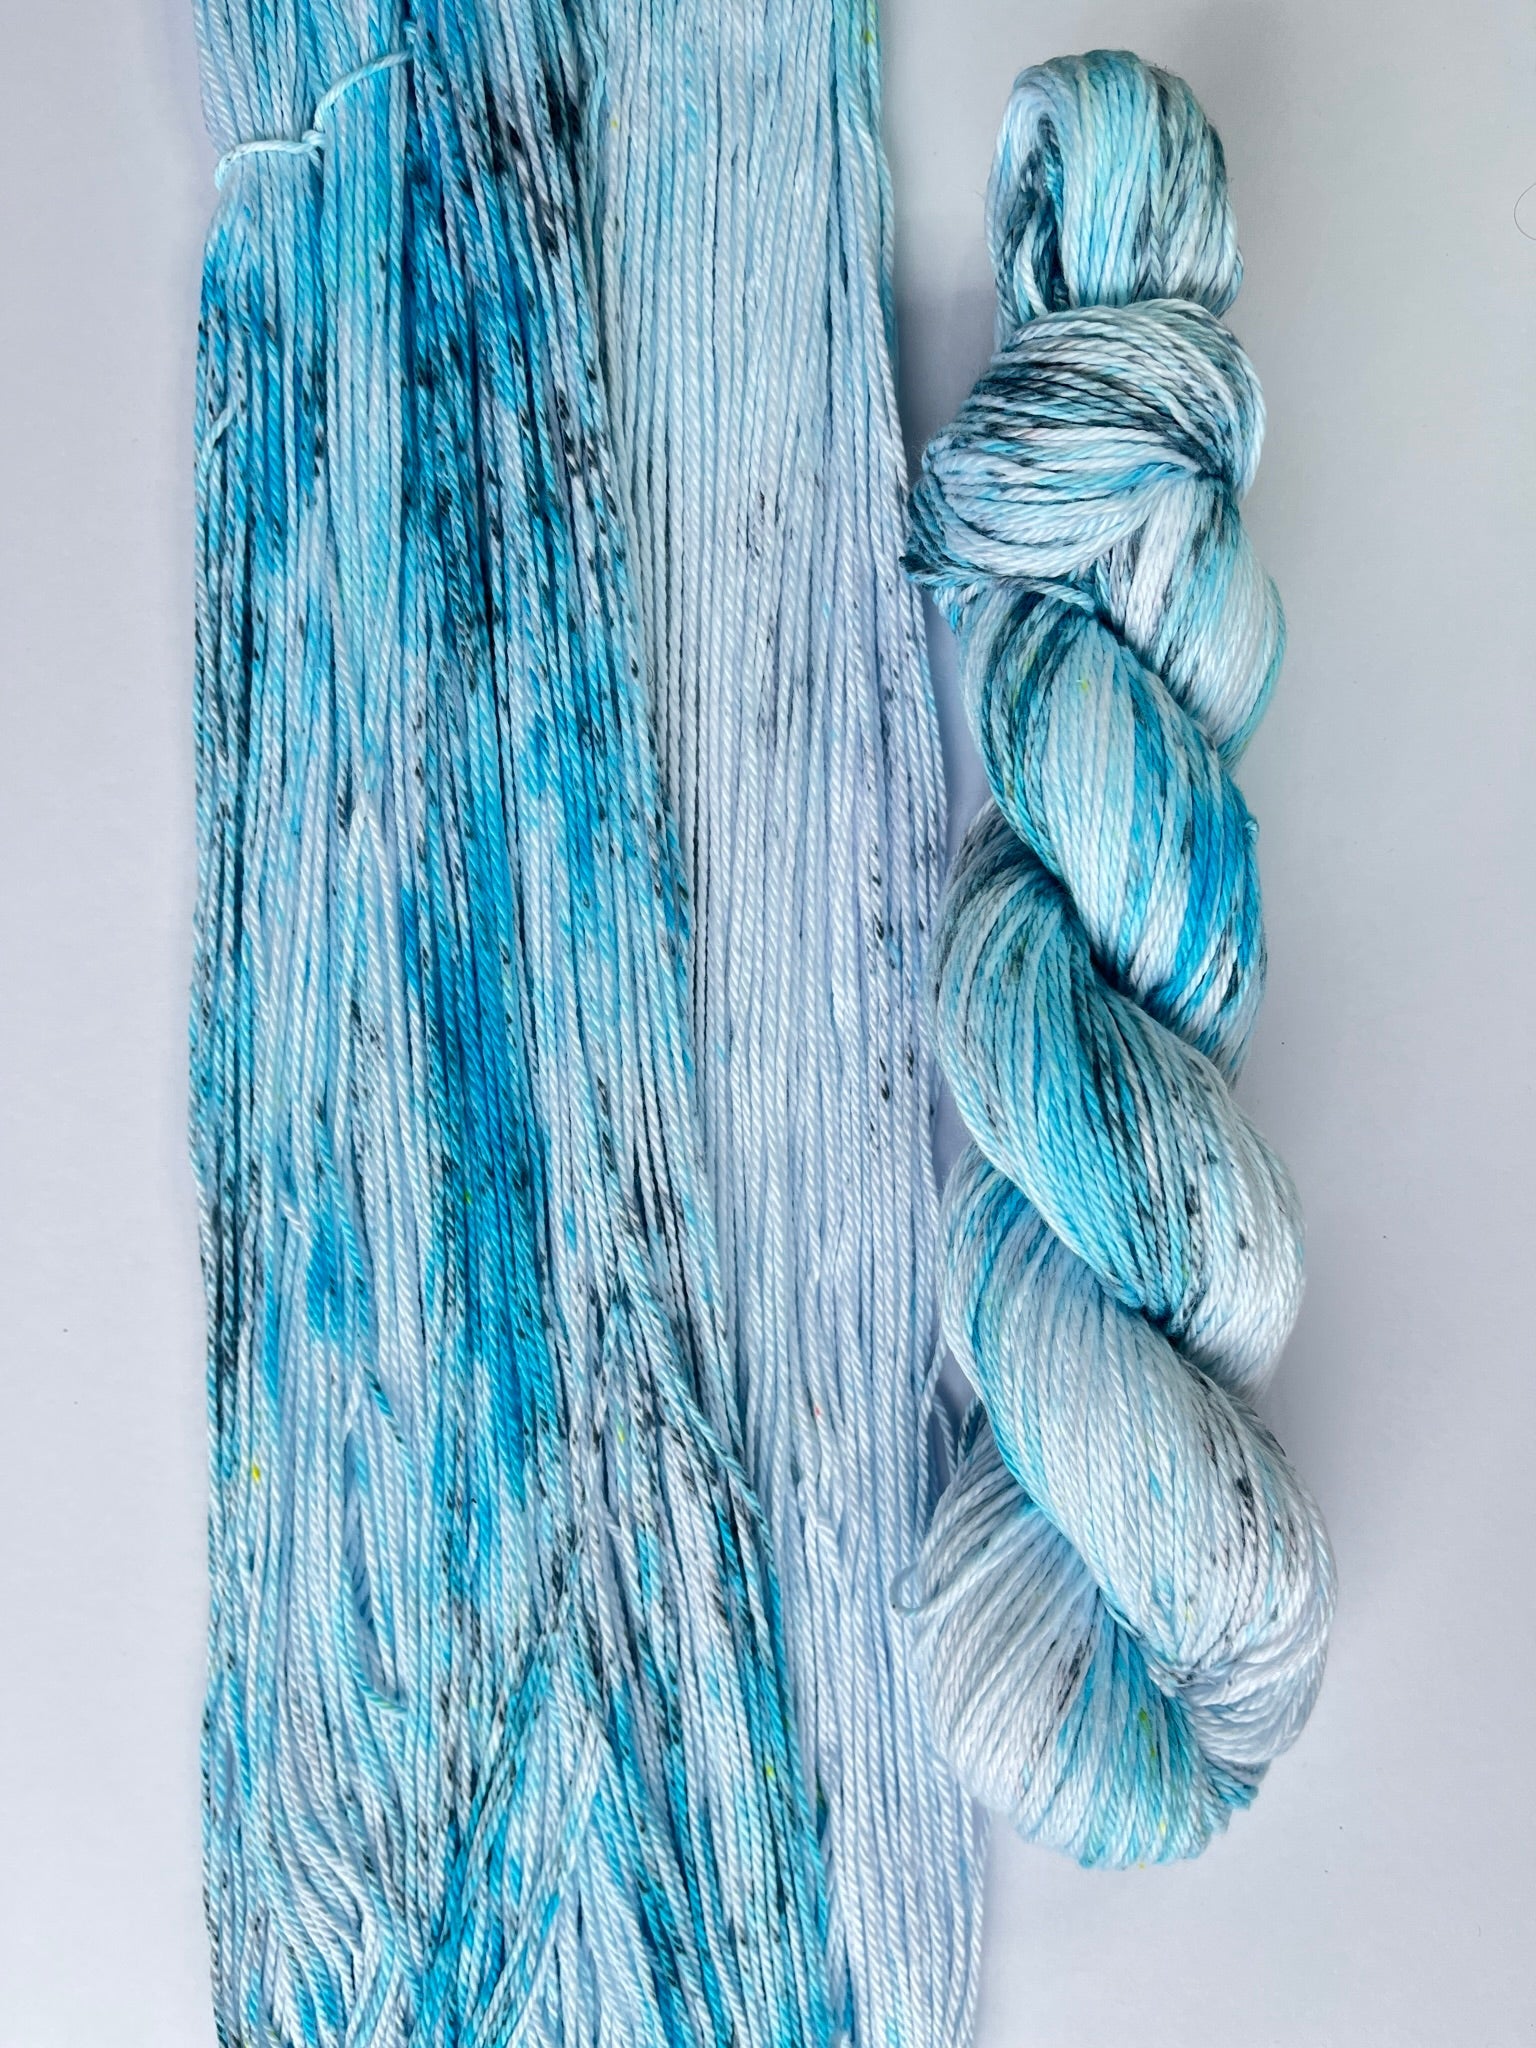 Inspired by Margot Storms a brewin' - Cotton baseStorms a brewin' is a mostly white base yarn, with a generous sprinkle of turquoise and black, giving it a beautiful, dramatic look!
This 100% cotton yarn is soft toInspired by Margot brewin' - Cotton base